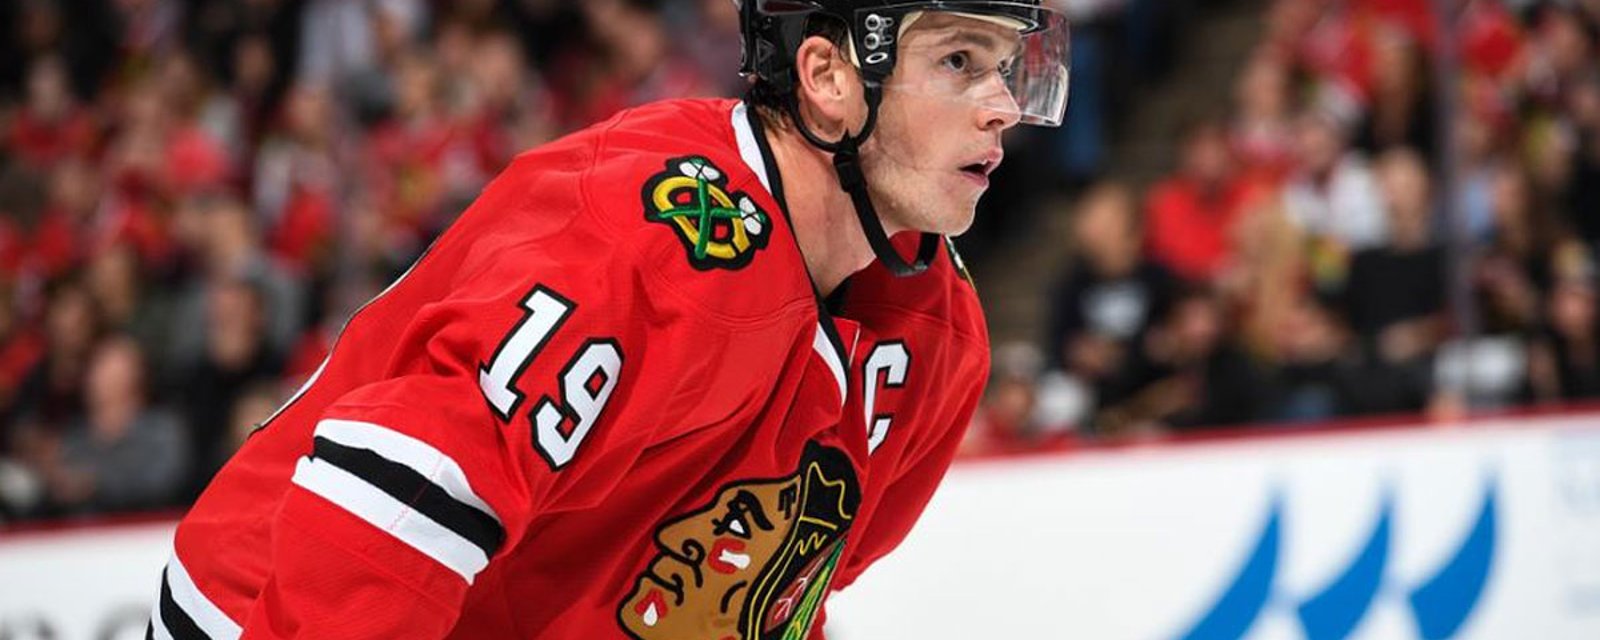 Must See: Jonathan Toews scores an AMAZING one-handed goal!